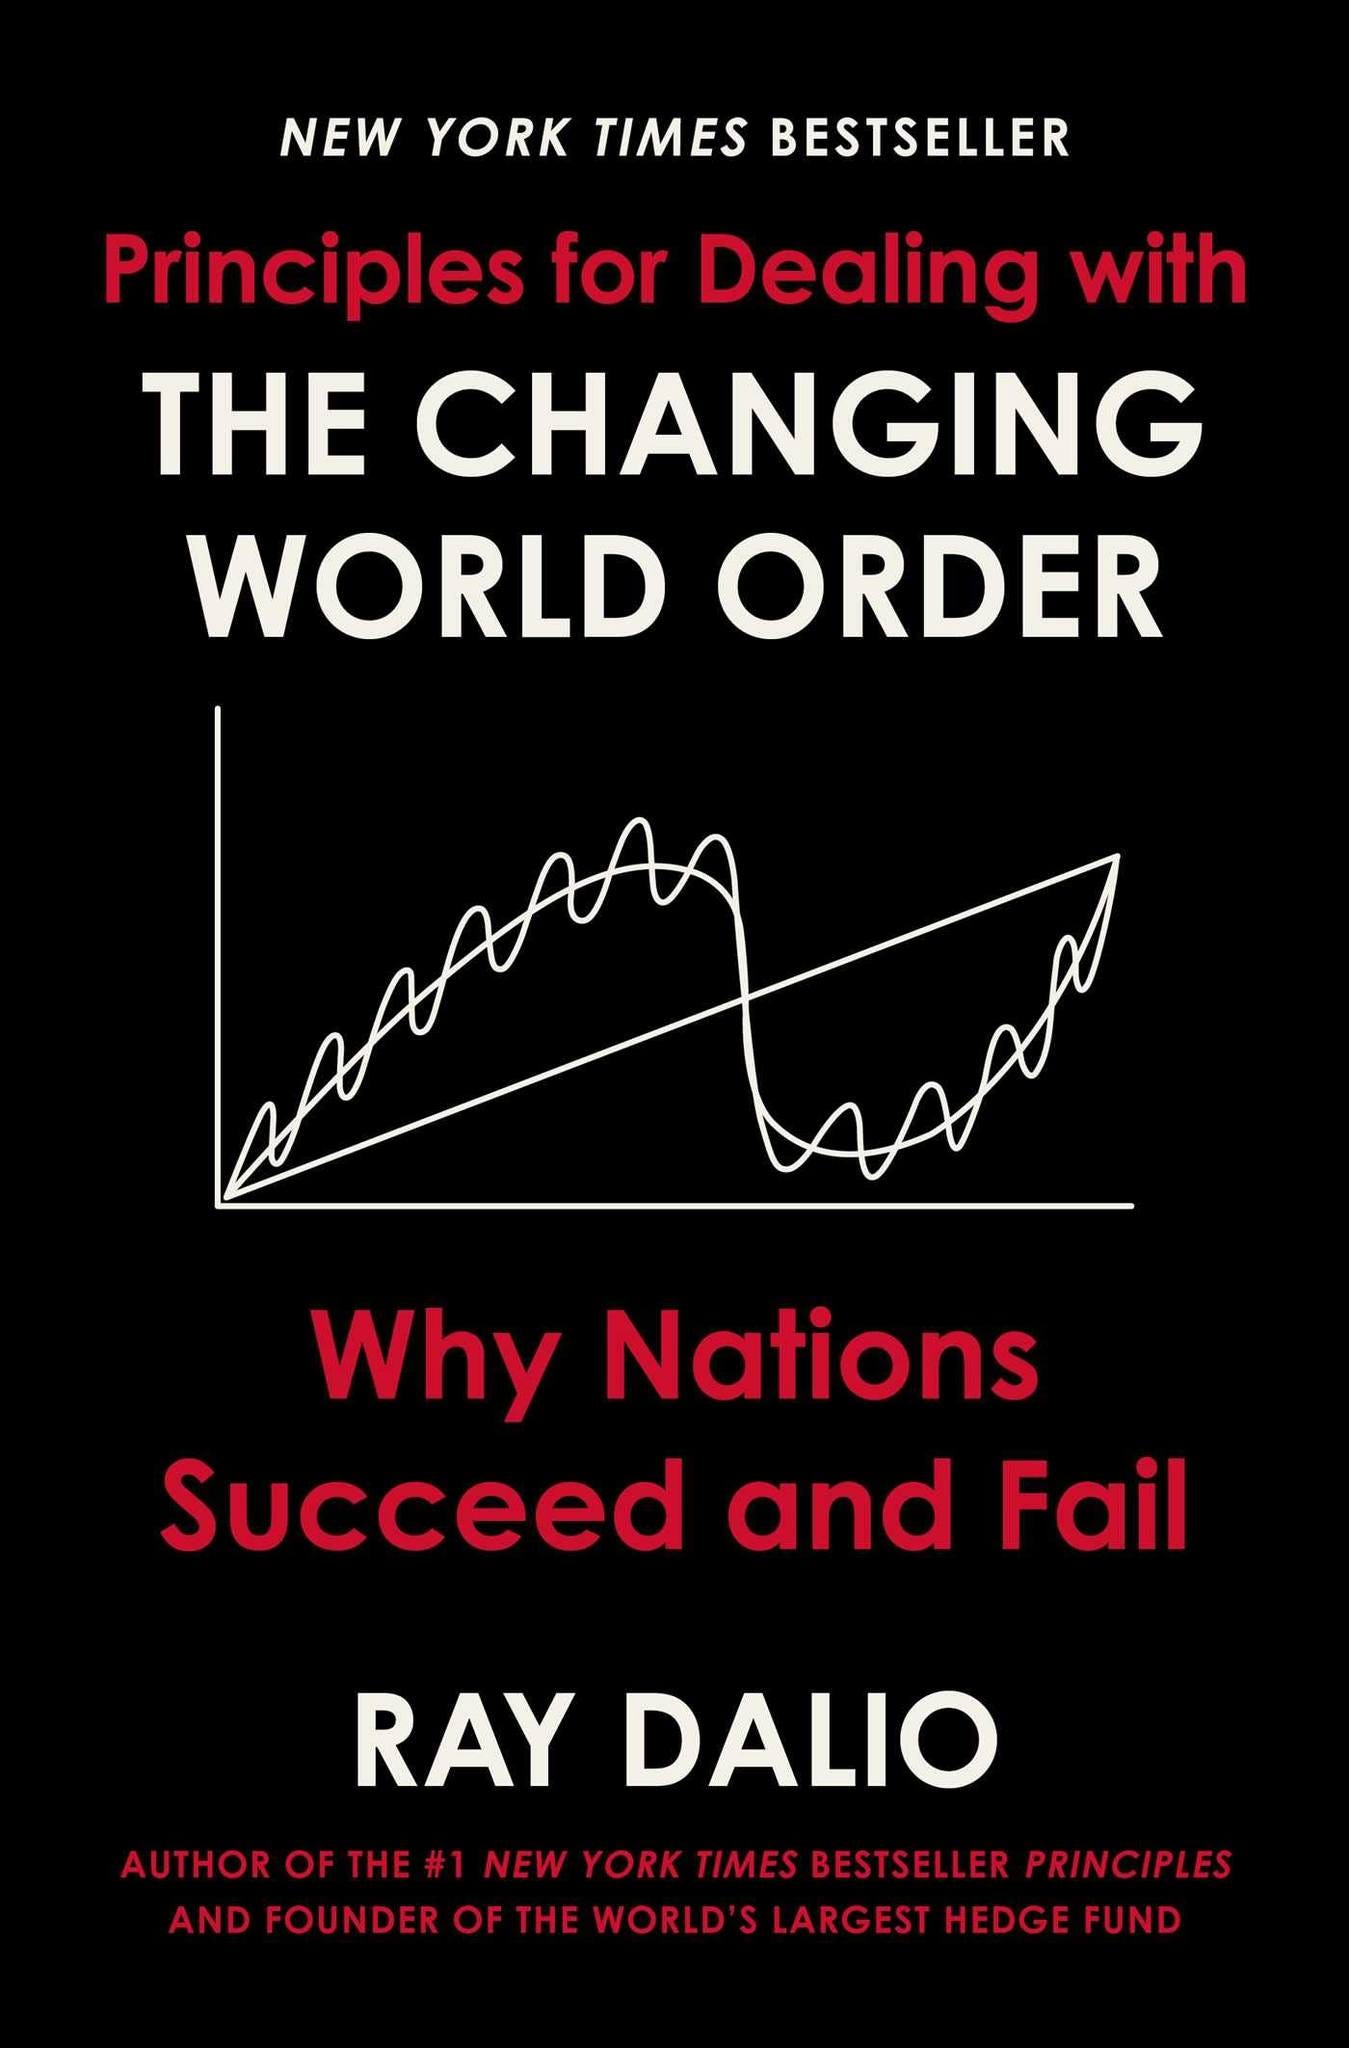 May be an image of text that says 'NEW YORK TIMES BESTSELLER Principles for Dealing with THE CHANGING WORLD ORDER Why Nations Succeed and Fail RAY DALIO AUTHOR OF THE NEW YORK TIMES BESTSELLER PRINCIPLES AND FOUNDER OF THE WORLD' LARGEST HEDGE FUND'